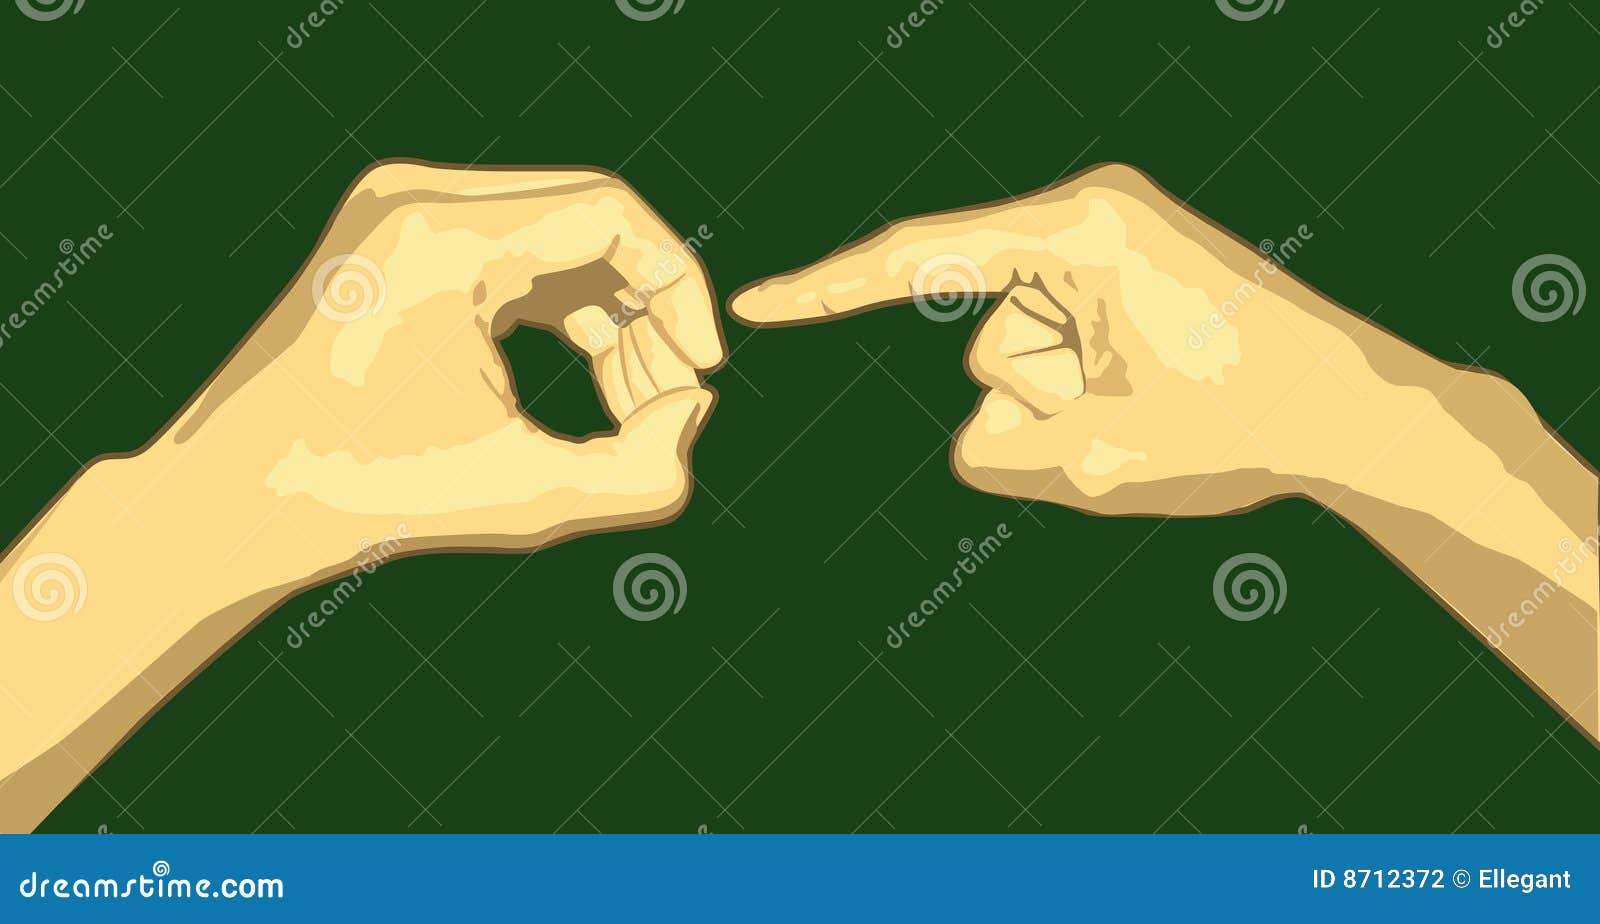 Sexual hand gesture on green background.